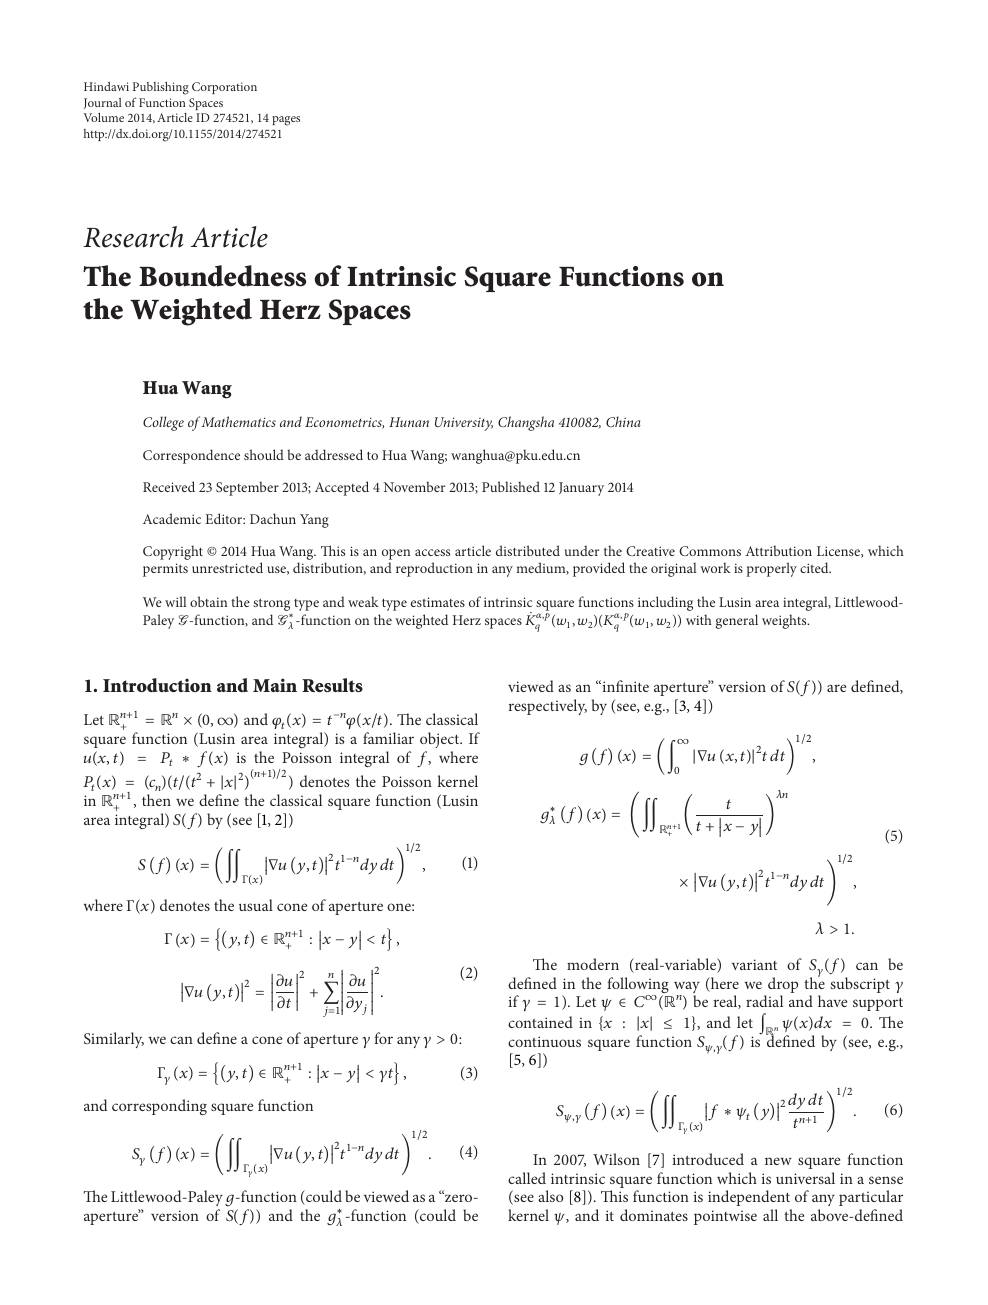 The Boundedness Of Intrinsic Square Functions On The Weighted Herz Spaces Topic Of Research Paper In Mathematics Download Scholarly Article Pdf And Read For Free On Cyberleninka Open Science Hub